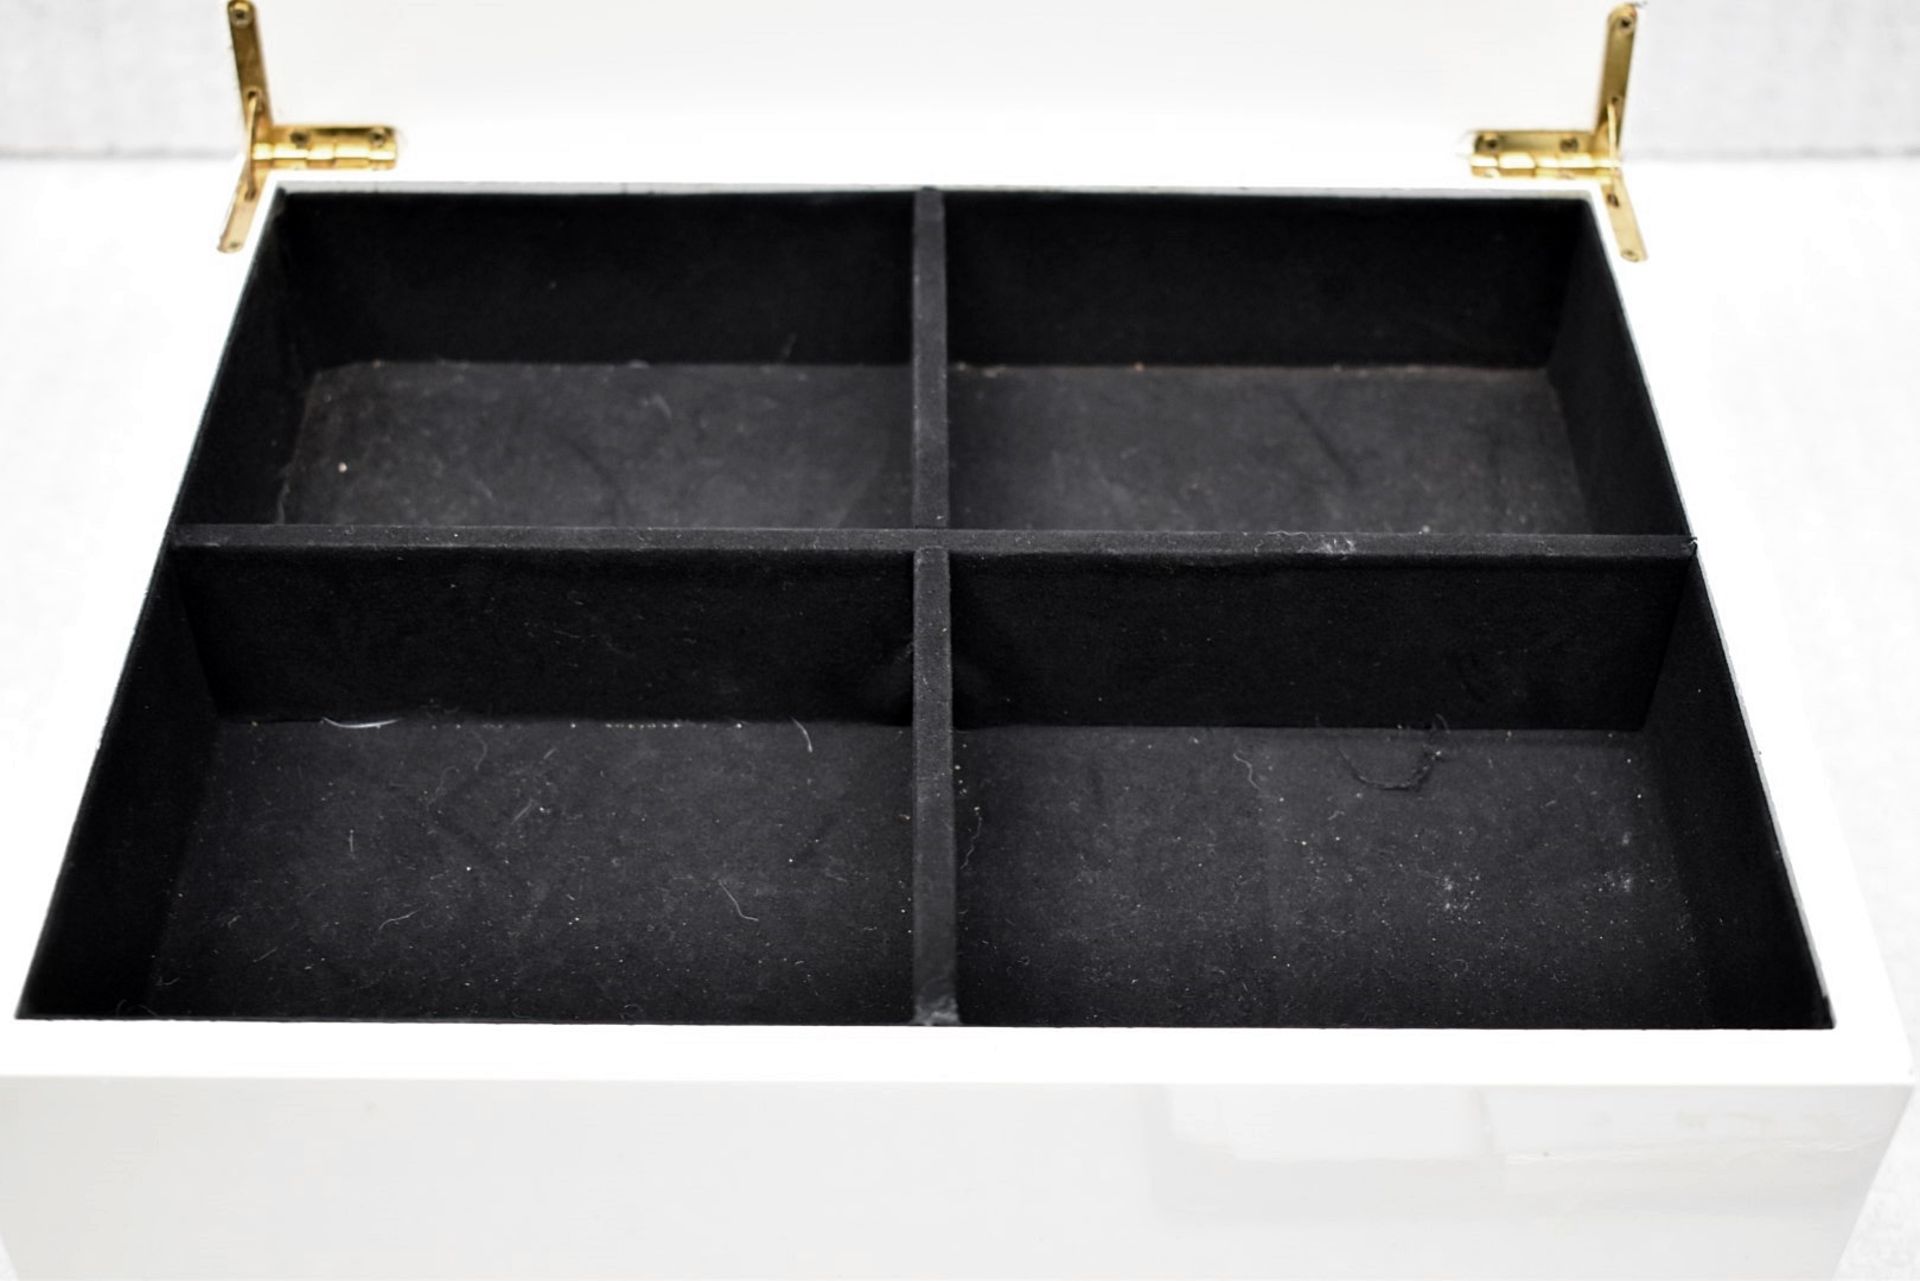 1 x Designer-style Jewellery Box In Cream With Statement Handle - Ref: CNT761/WH2/C23 - CL845 - NO - Image 3 of 4